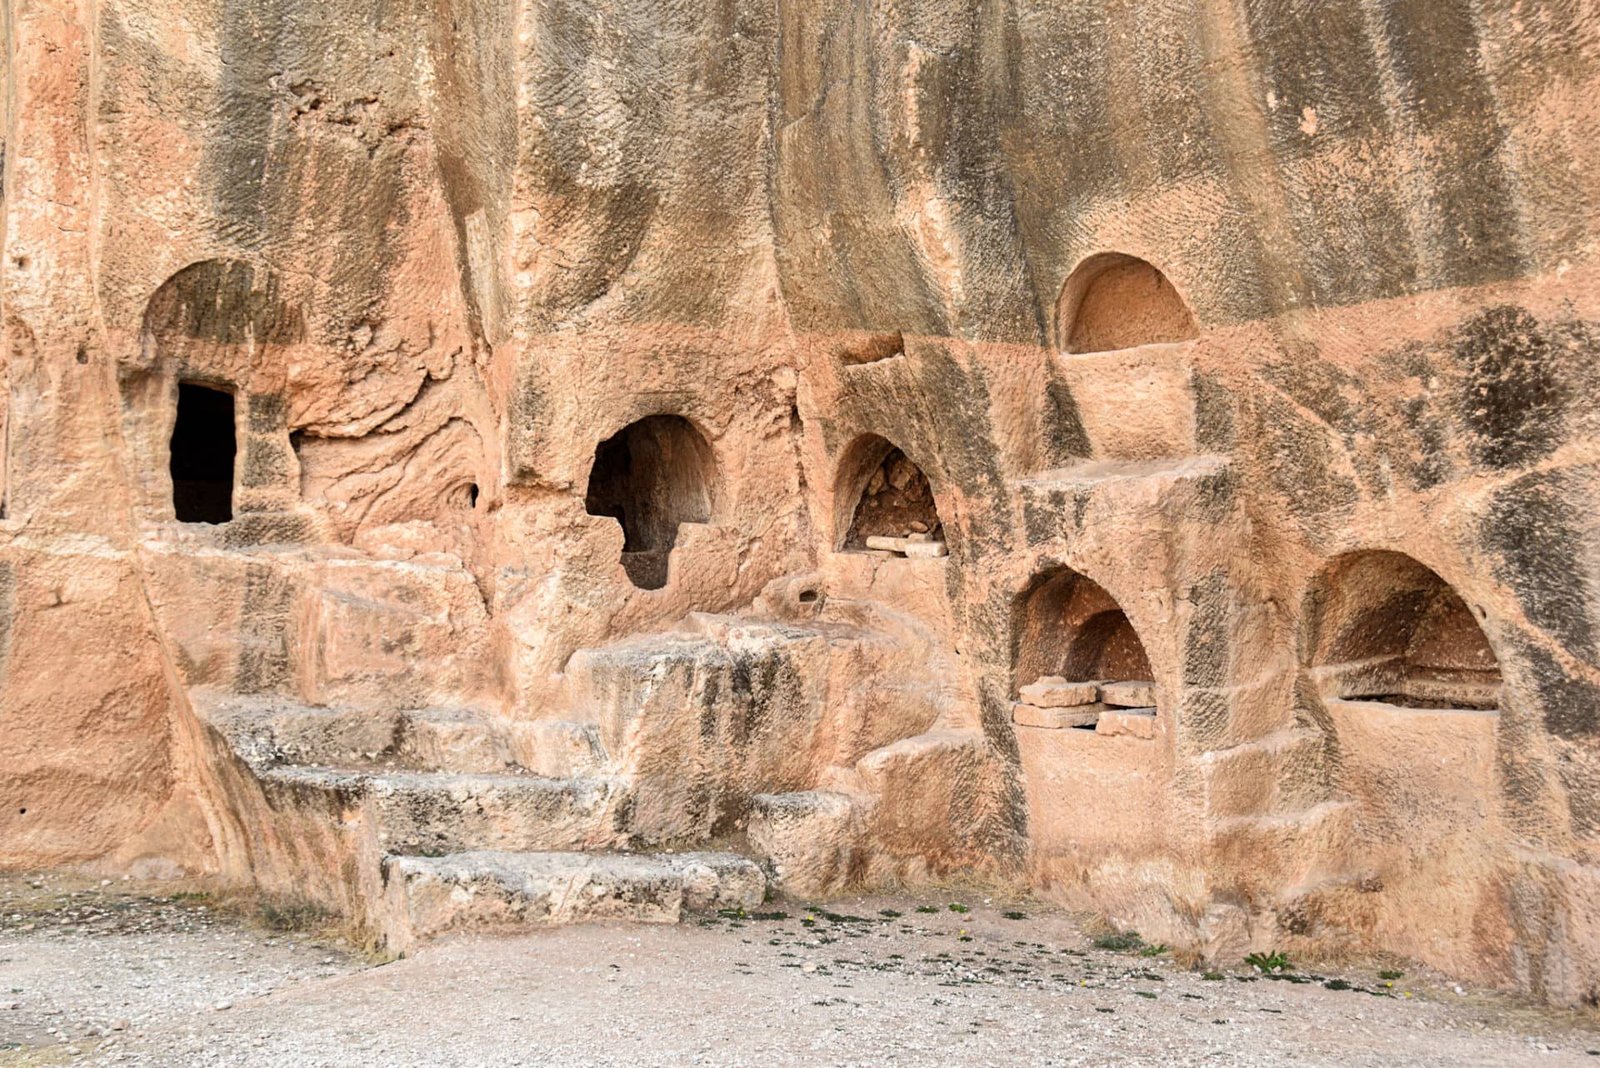 Roman tombs cut into the smooth rockface of an old quarry in the ancient city of Dara